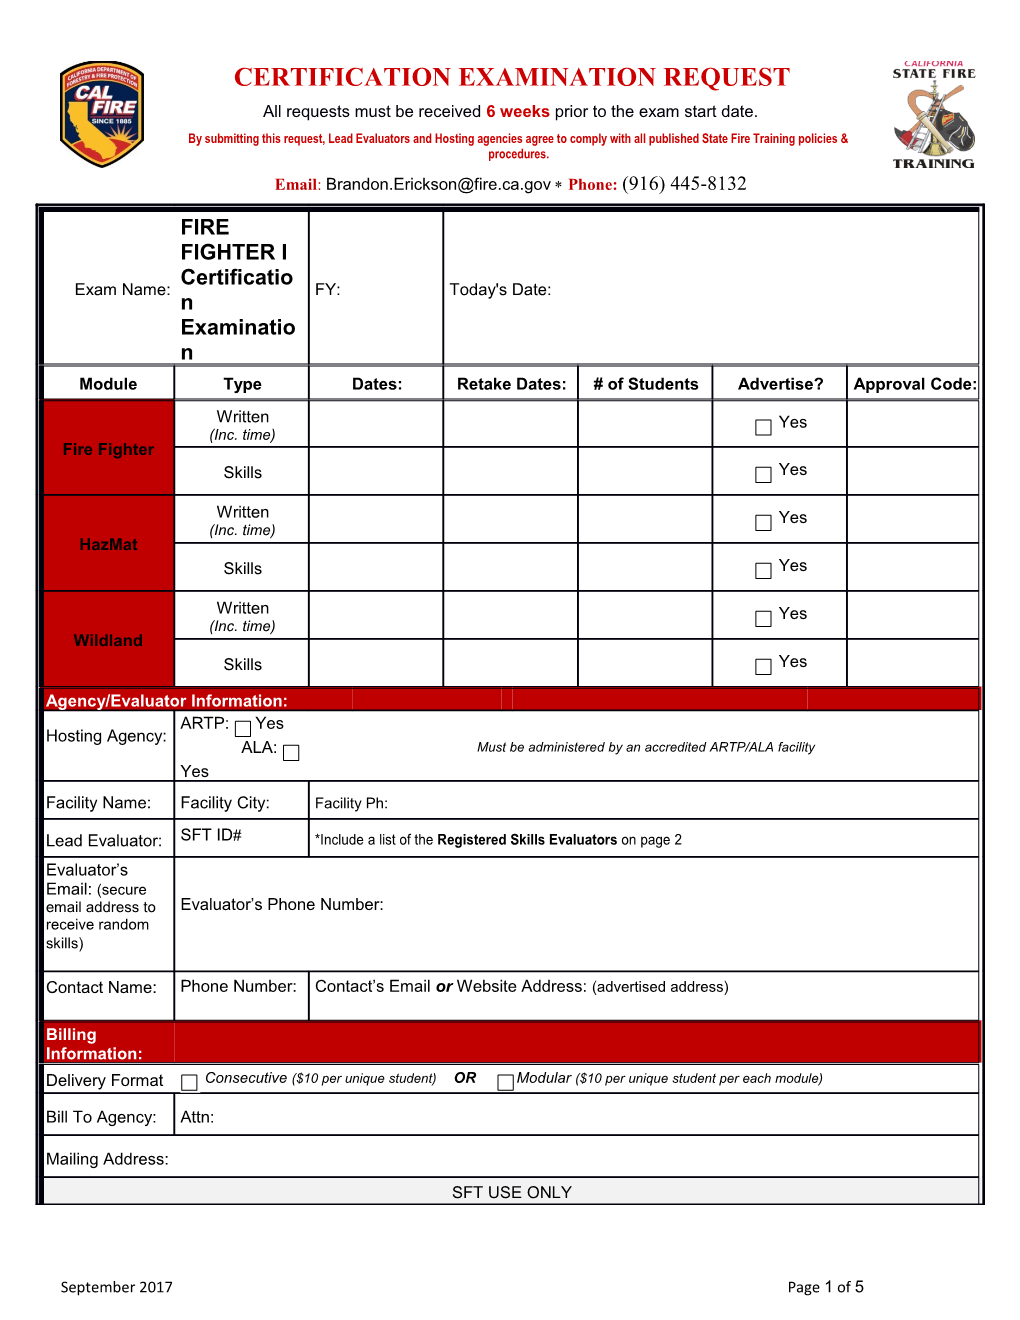 Certification Examination Request Form